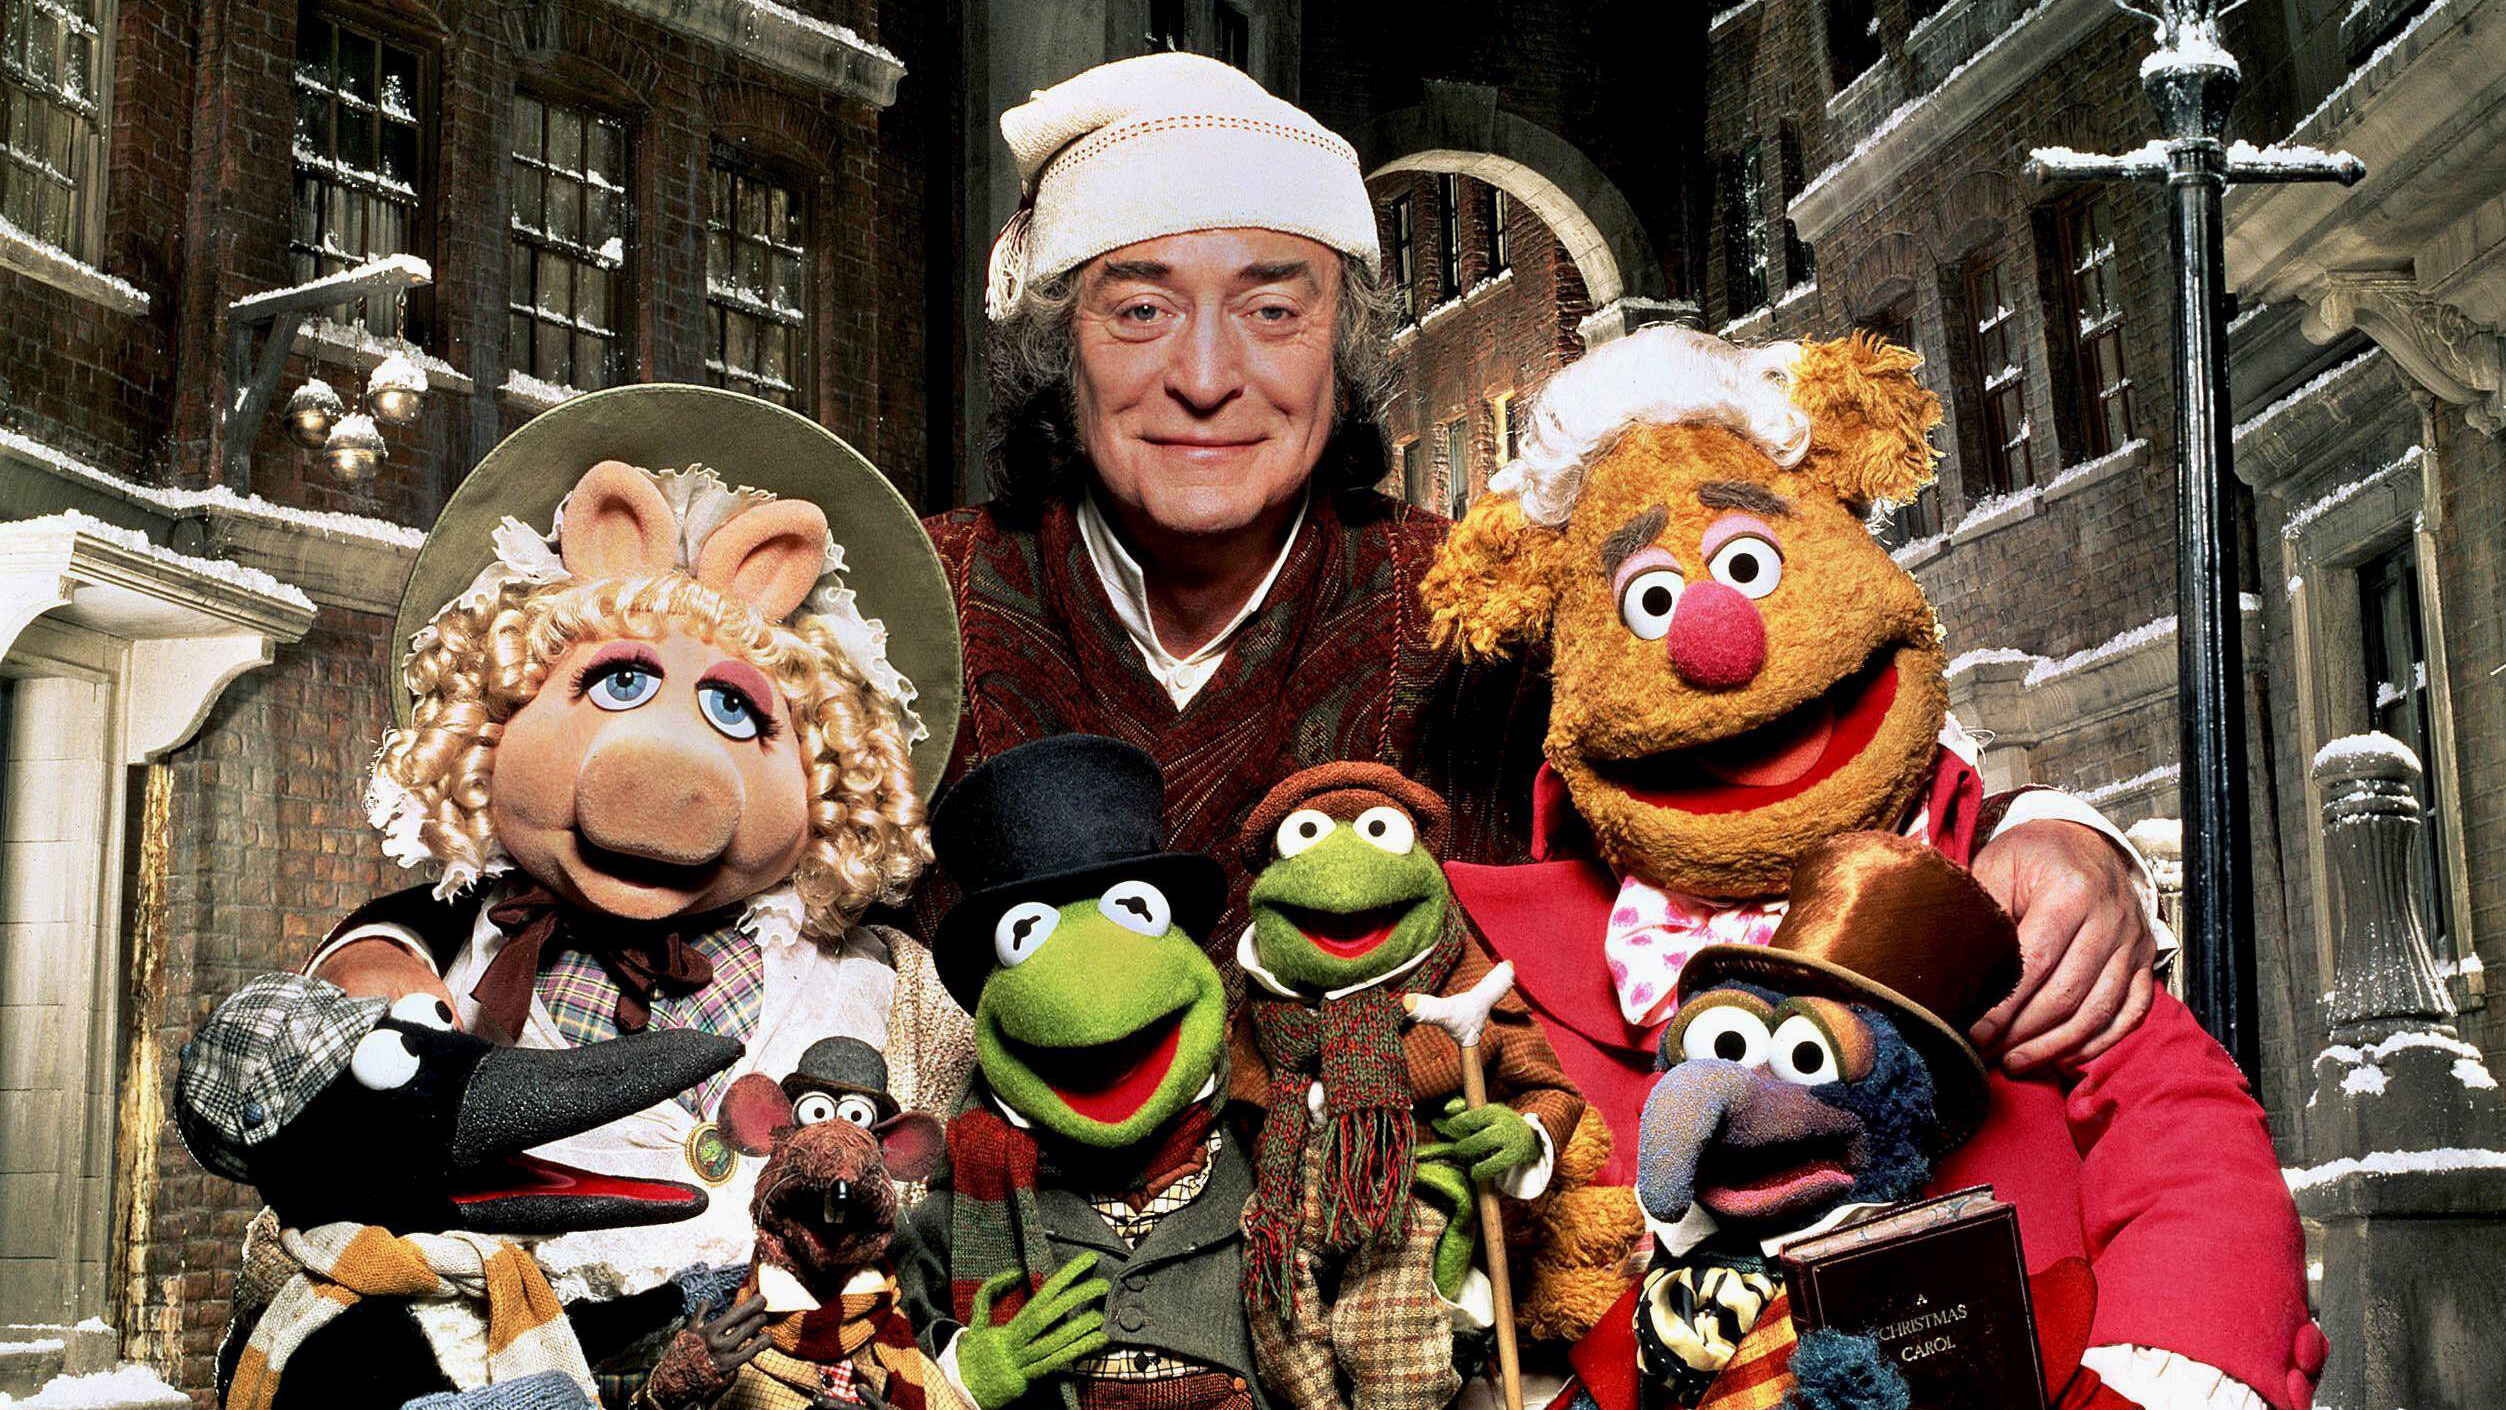 The Muppets and Michael Caine star in The Muppet Christmas Carol. Photo: AJ Pics / Alamy Stock Photo